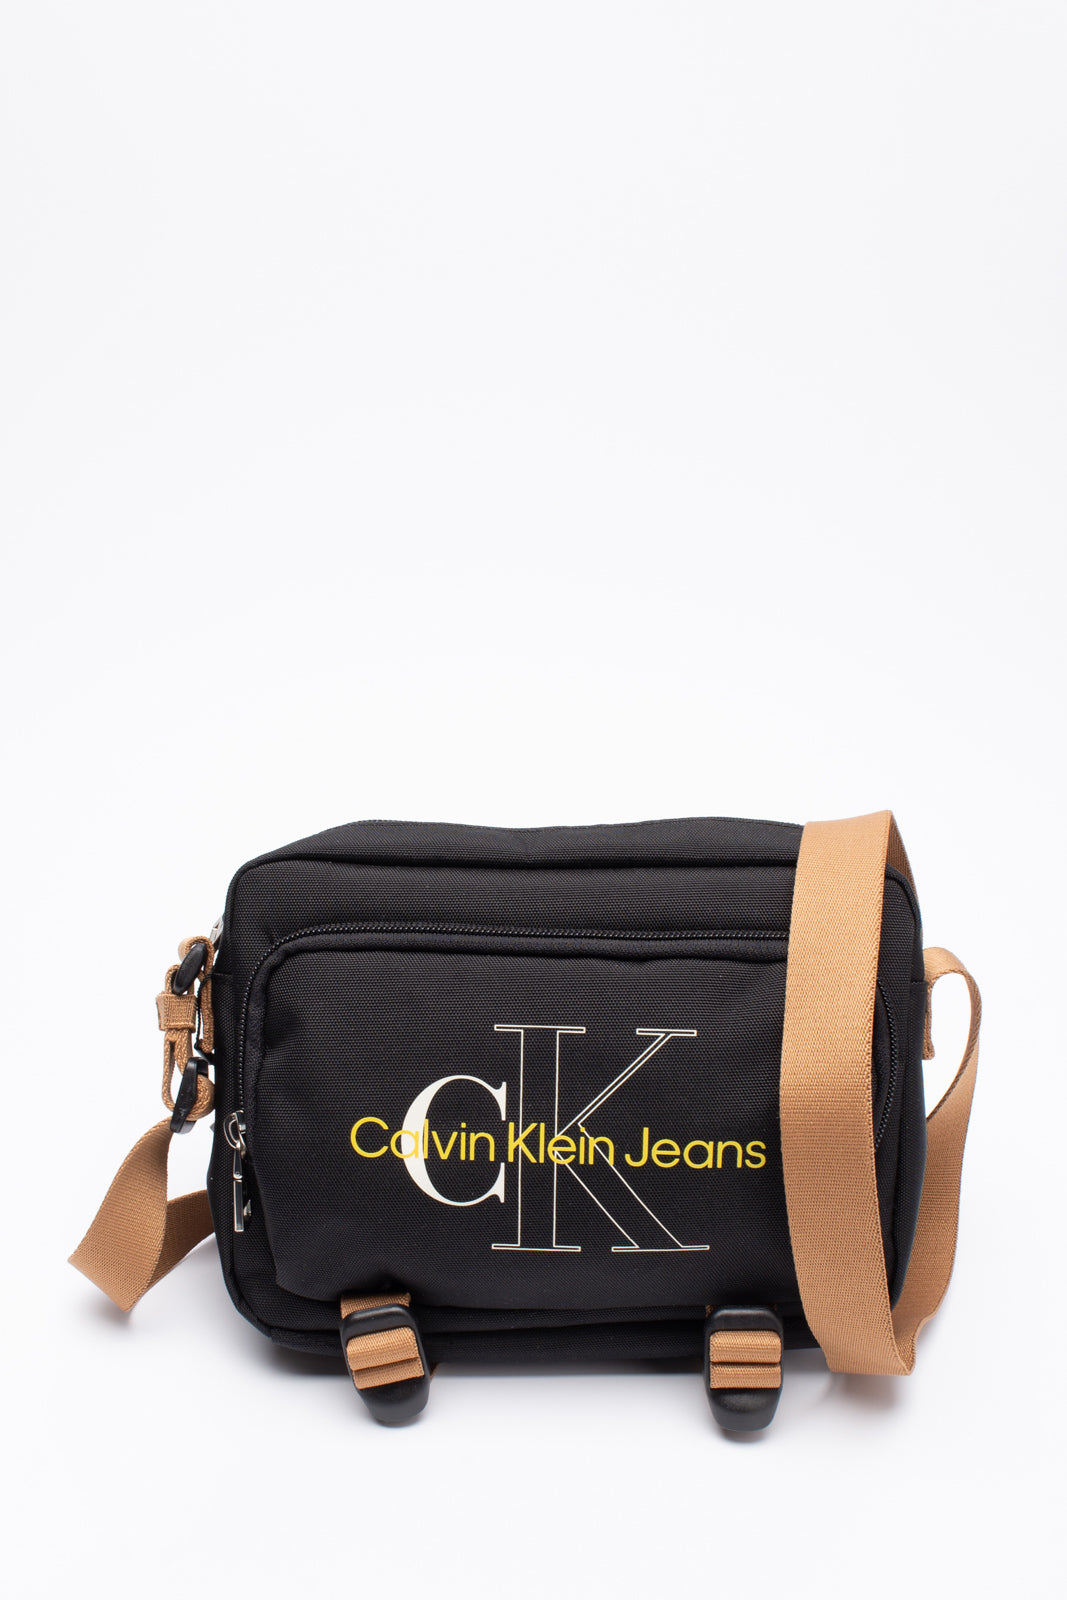 CALVIN KLEIN JEANS Crossbody Bag Sports Design Recycled Fabric Adjustable Strap gallery main photo